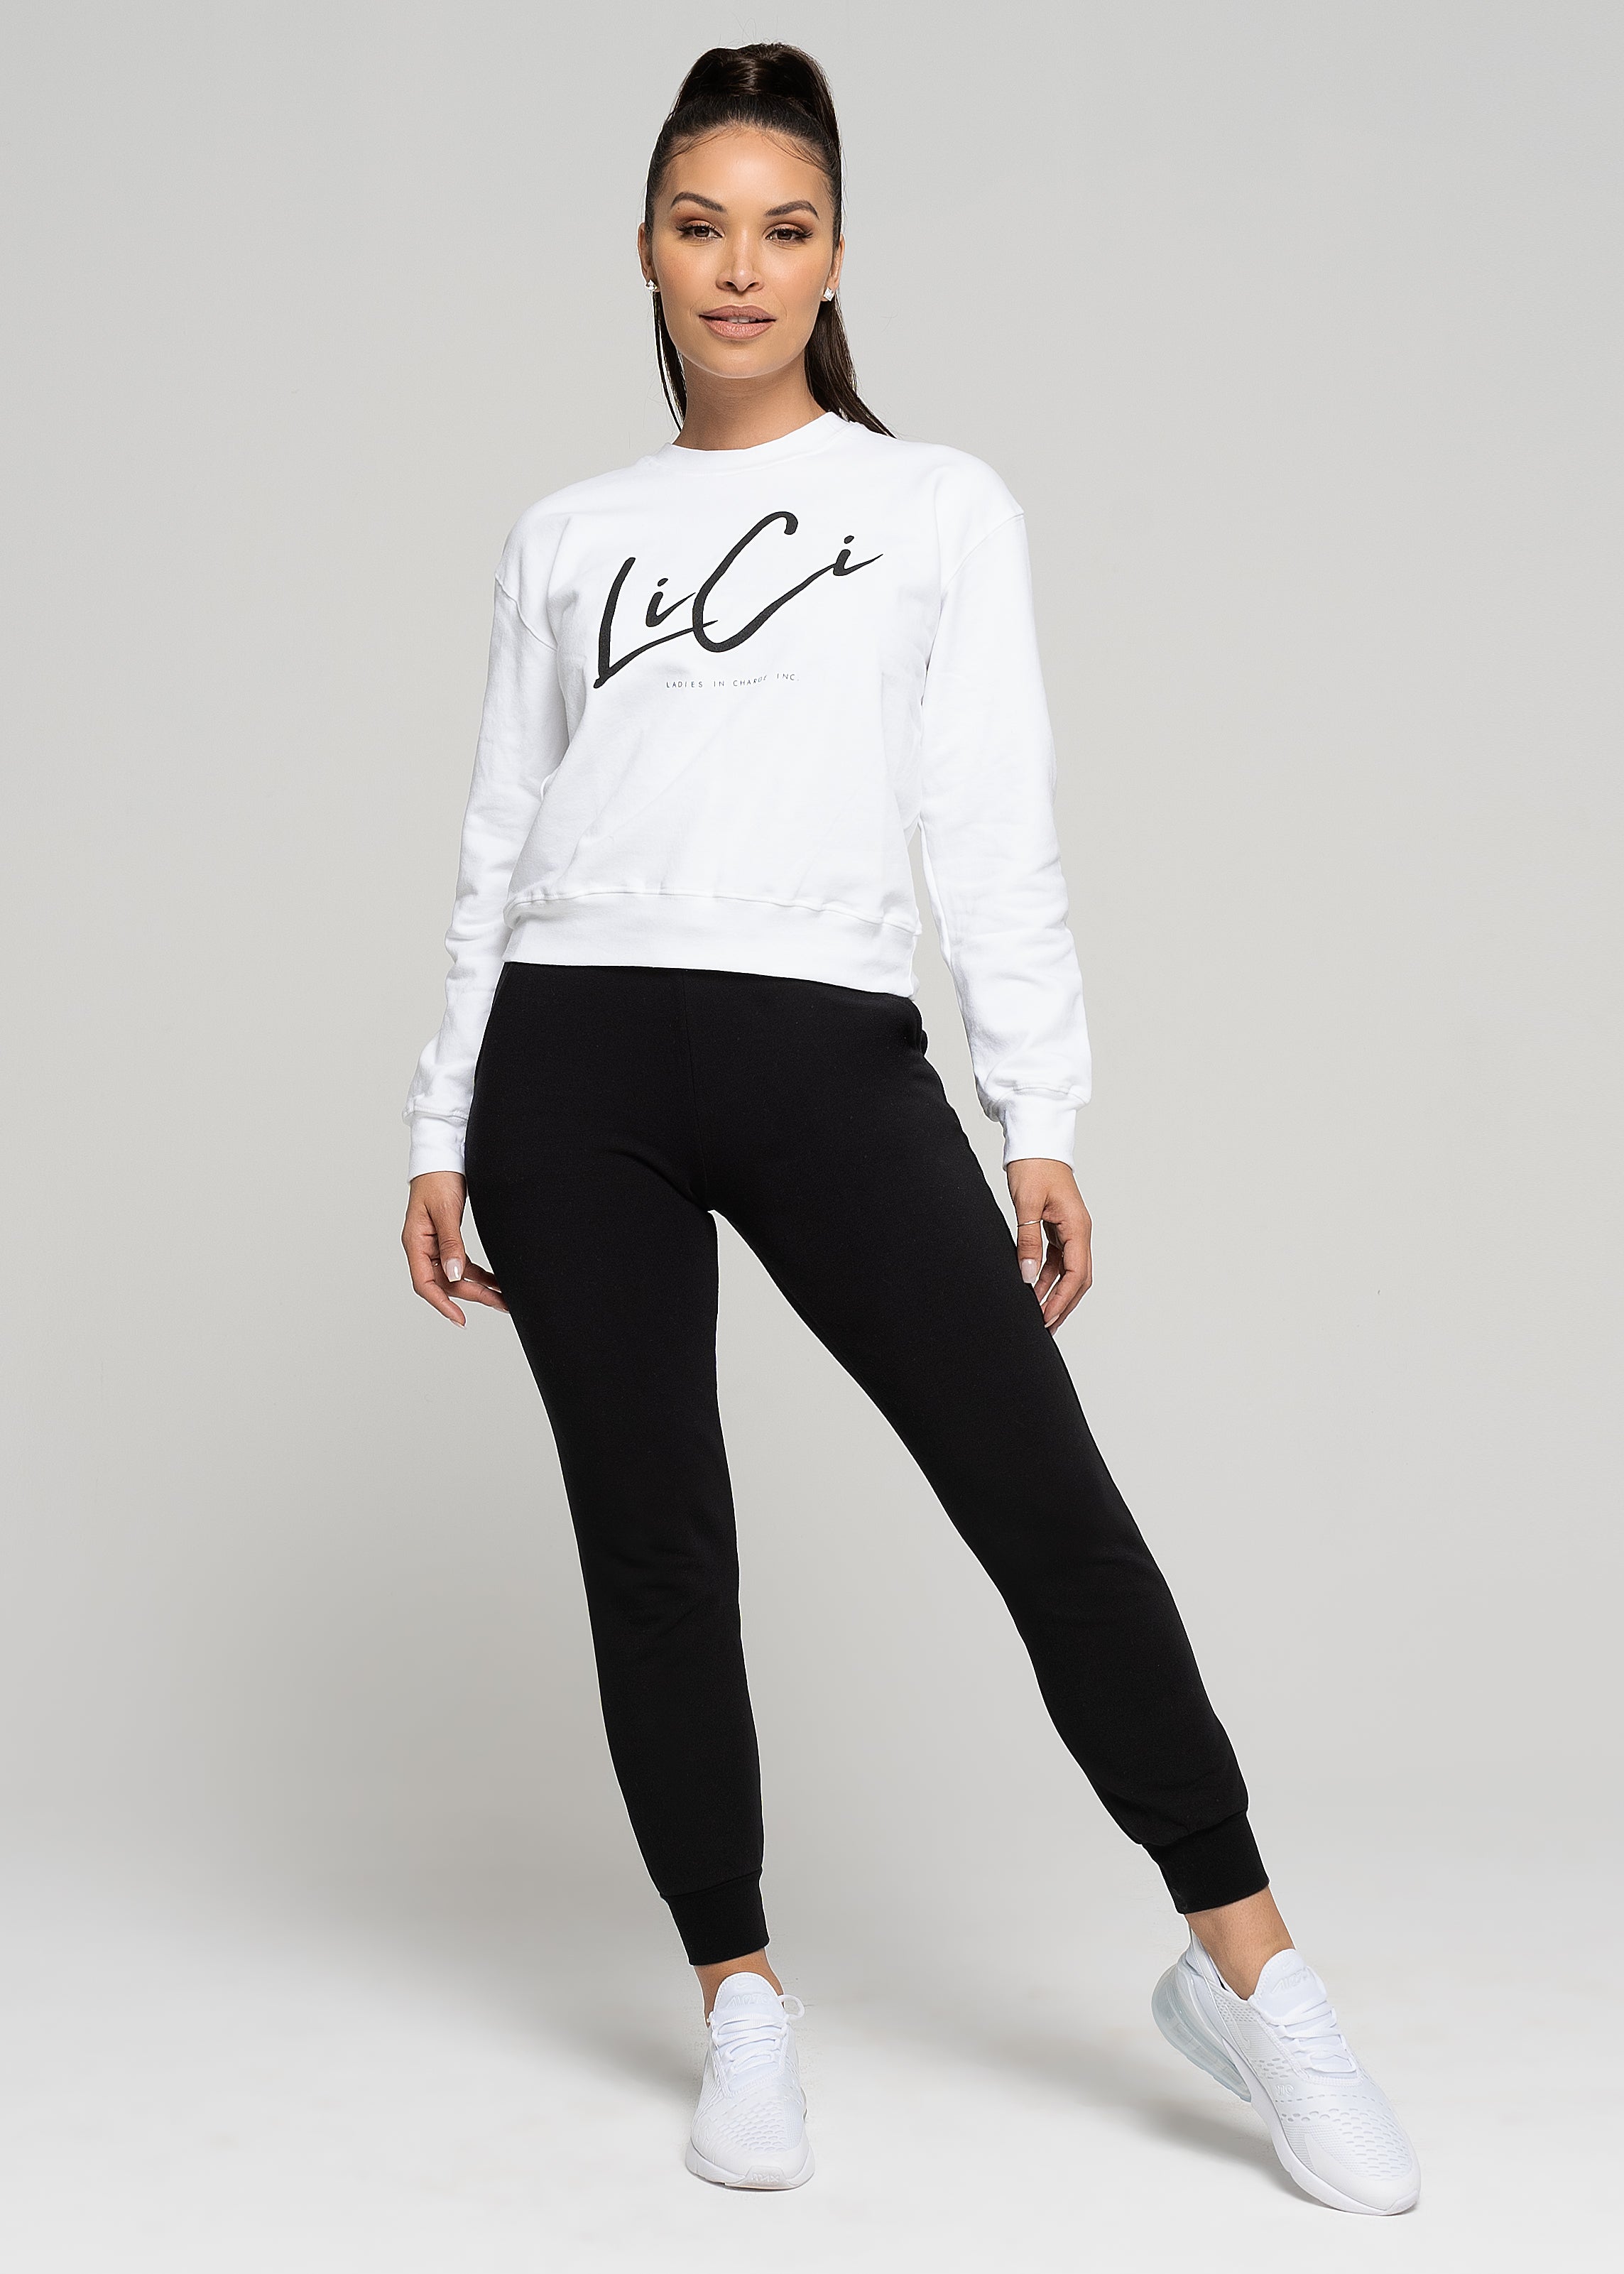 White Ladies in Charge Crewneck